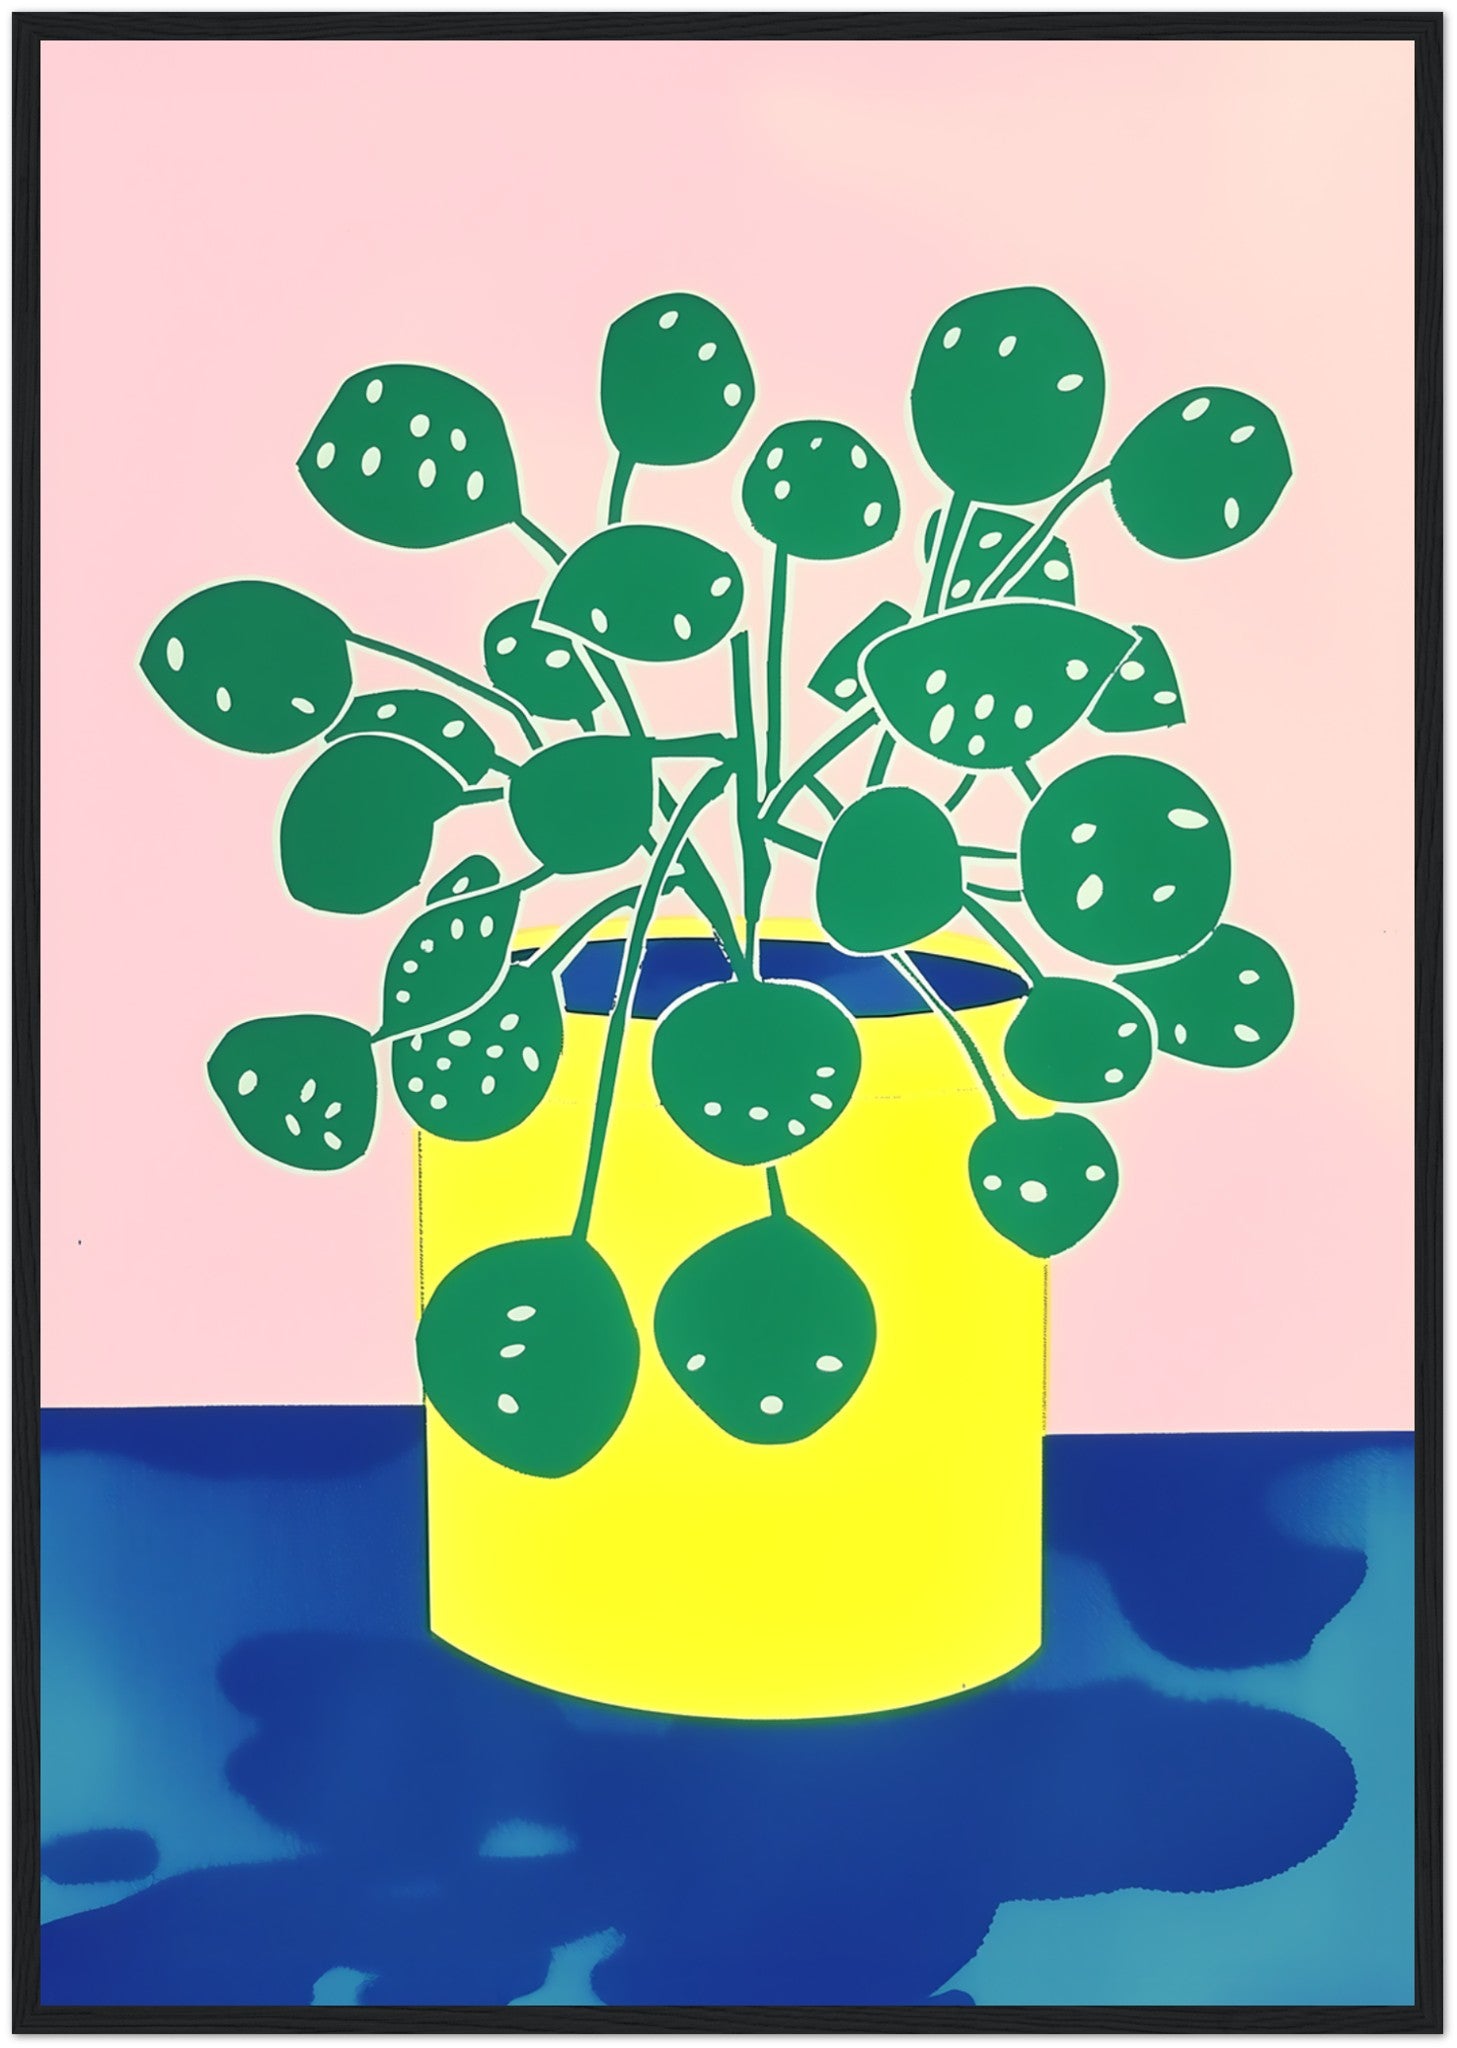 Stylized illustration of a potted plant with green leaves in a yellow pot against a pink background.